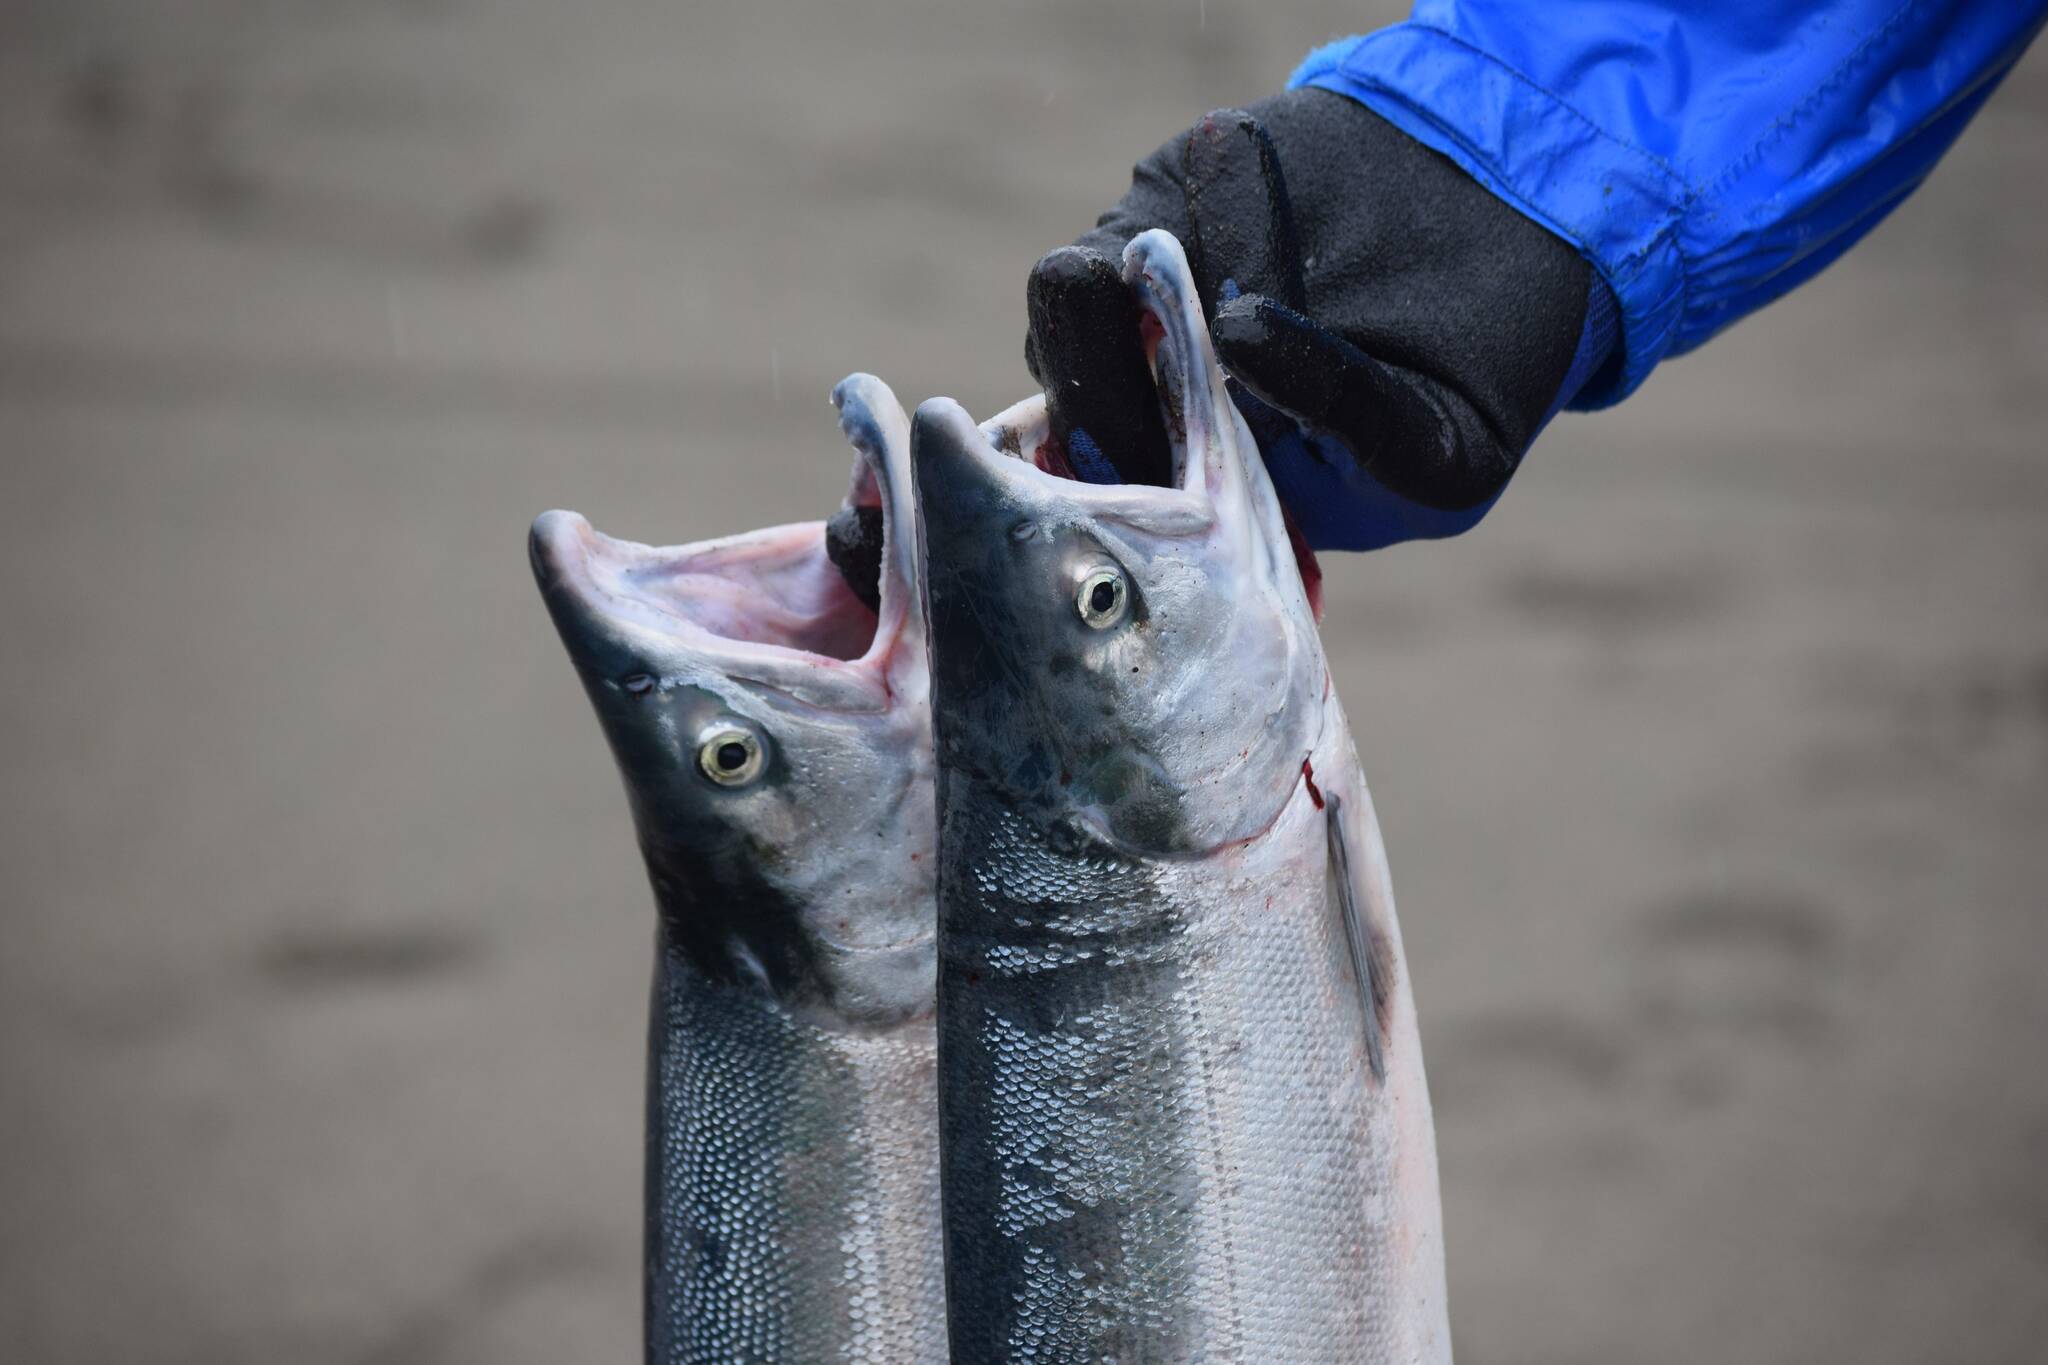 Raymond Bradbury preserves his salmon while dipnetting in the mouth of the Kenai River on Saturday, July 10, 2021. (Camille Botello/Peninsula Clarion)